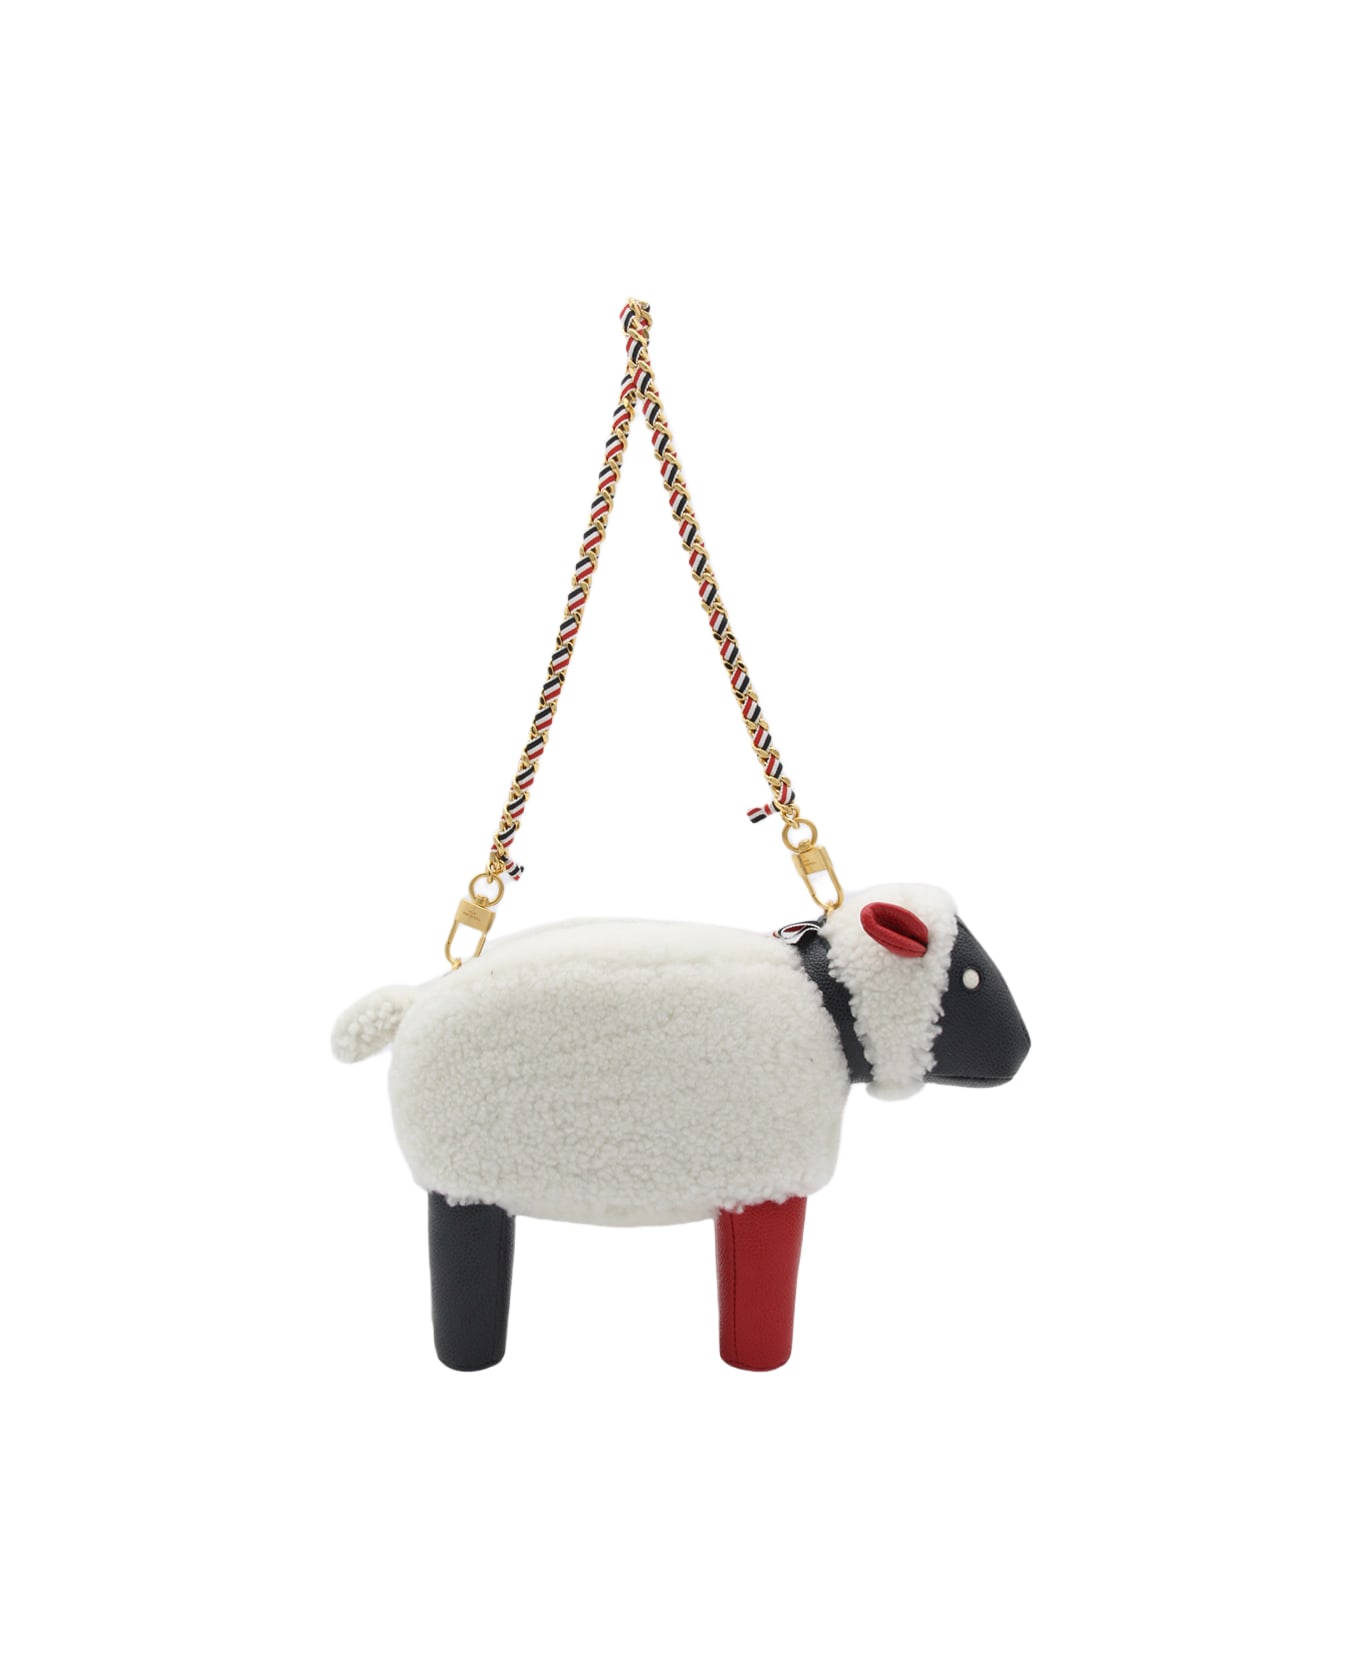 Thom Browne Multicolour Leather Sheep Bag - Red